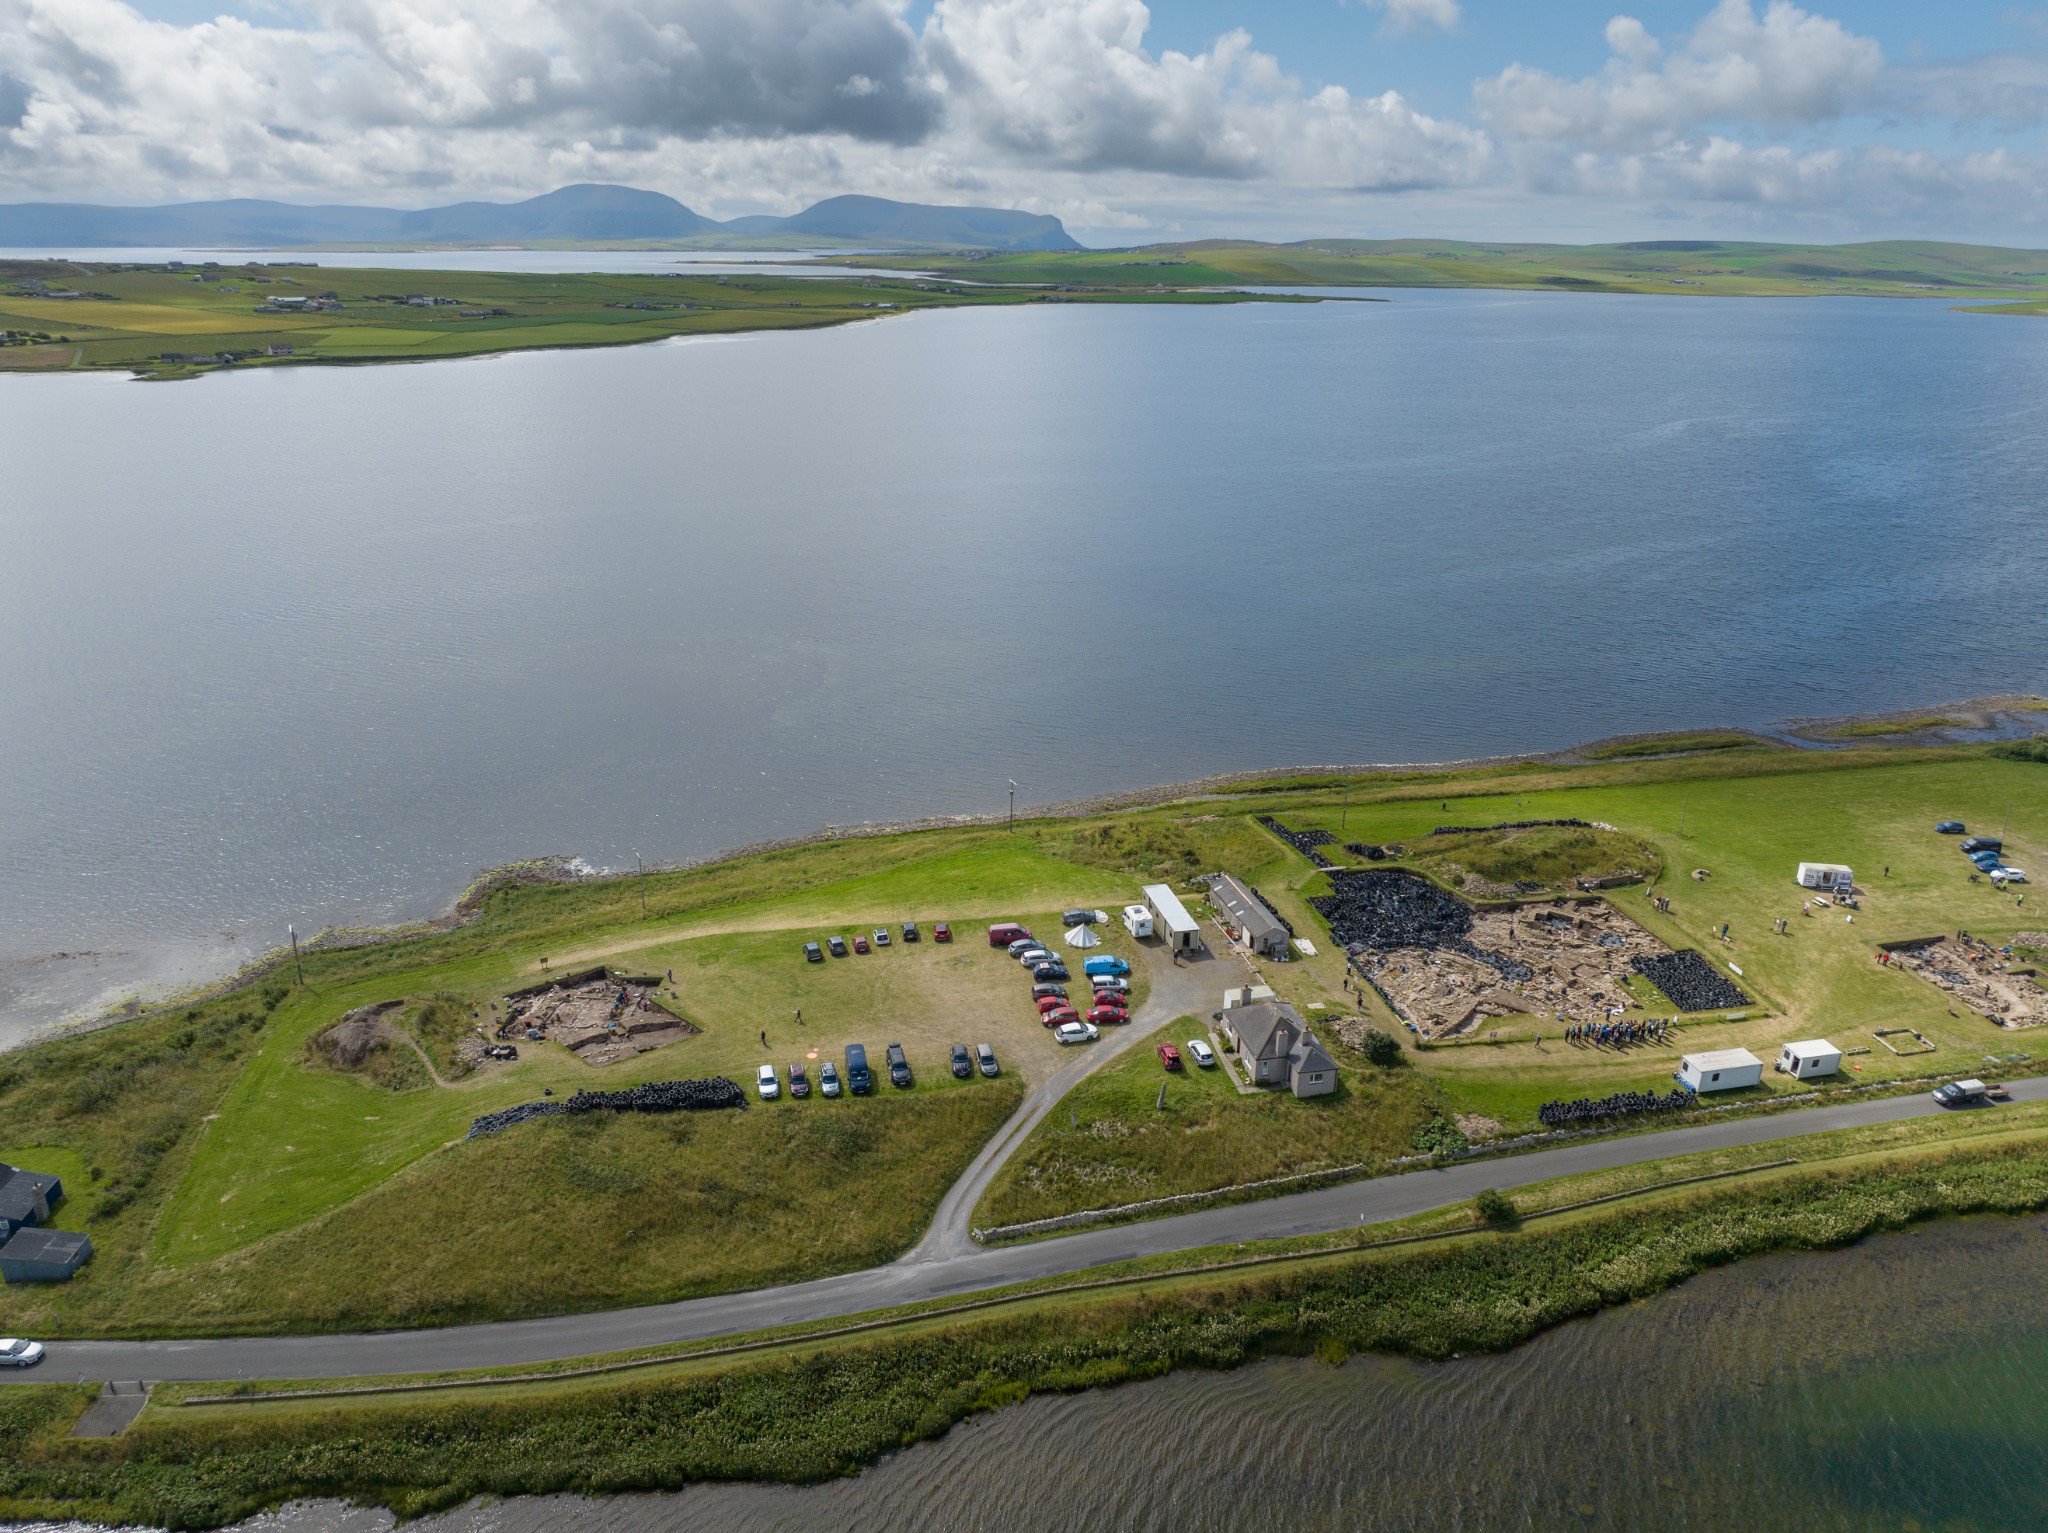 Aerial view of the Ness of Brodgar dig - image by Scott Pike